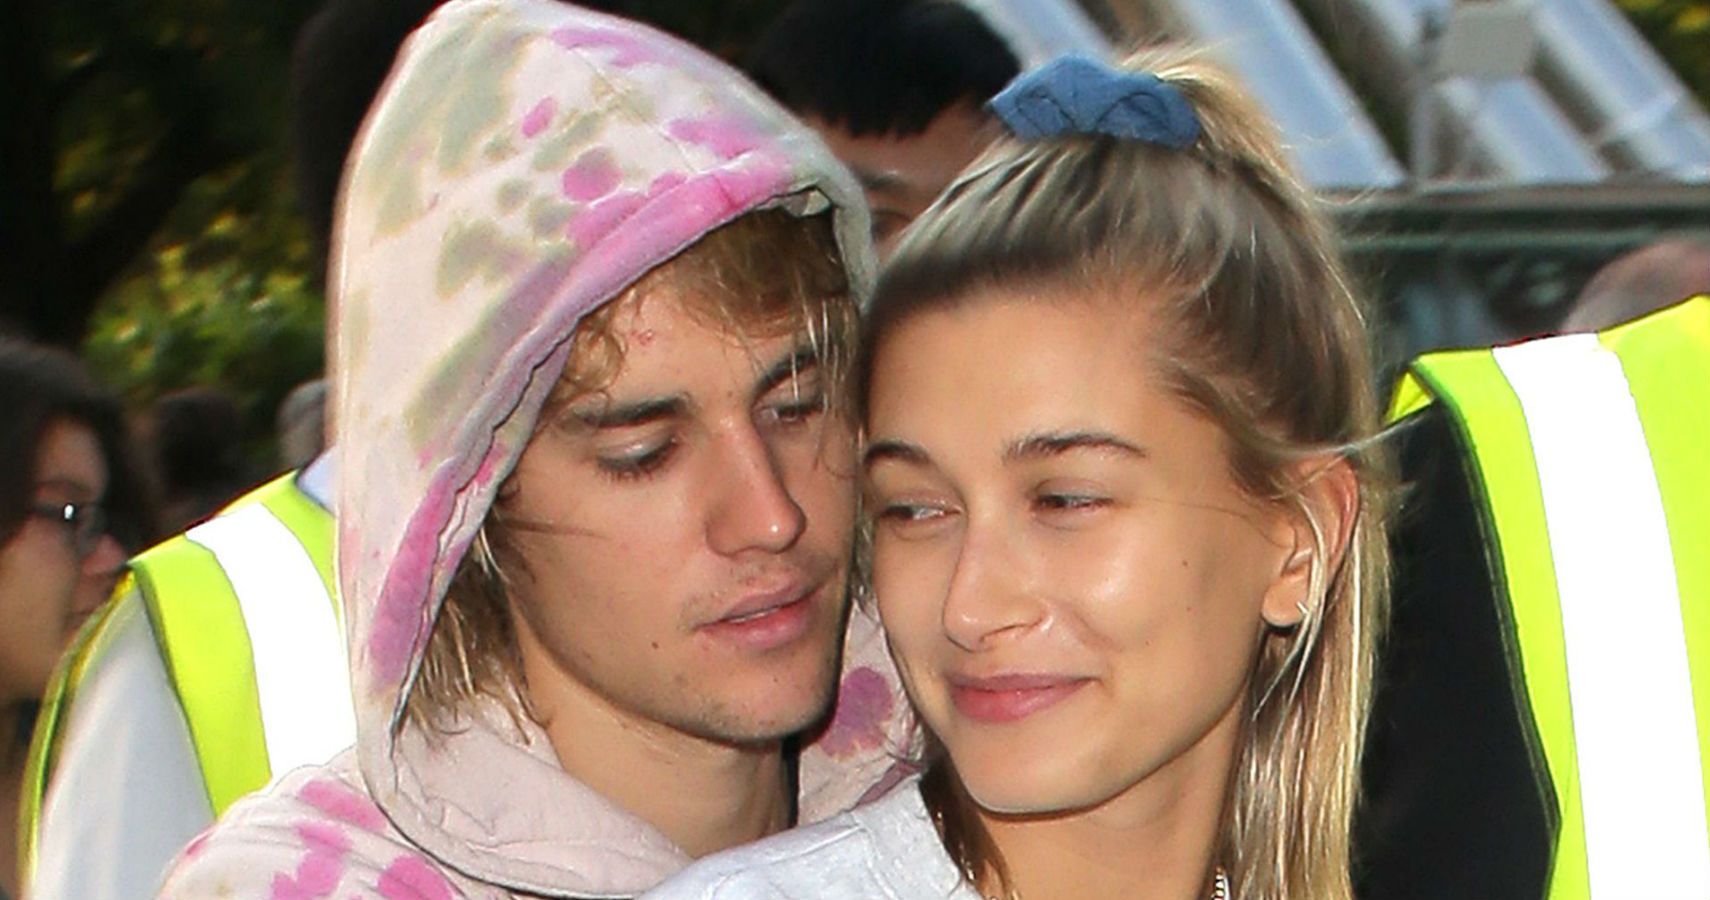 Justin Bieber Says He's In 'No Rush' To Have Kids With Hailey Baldwin